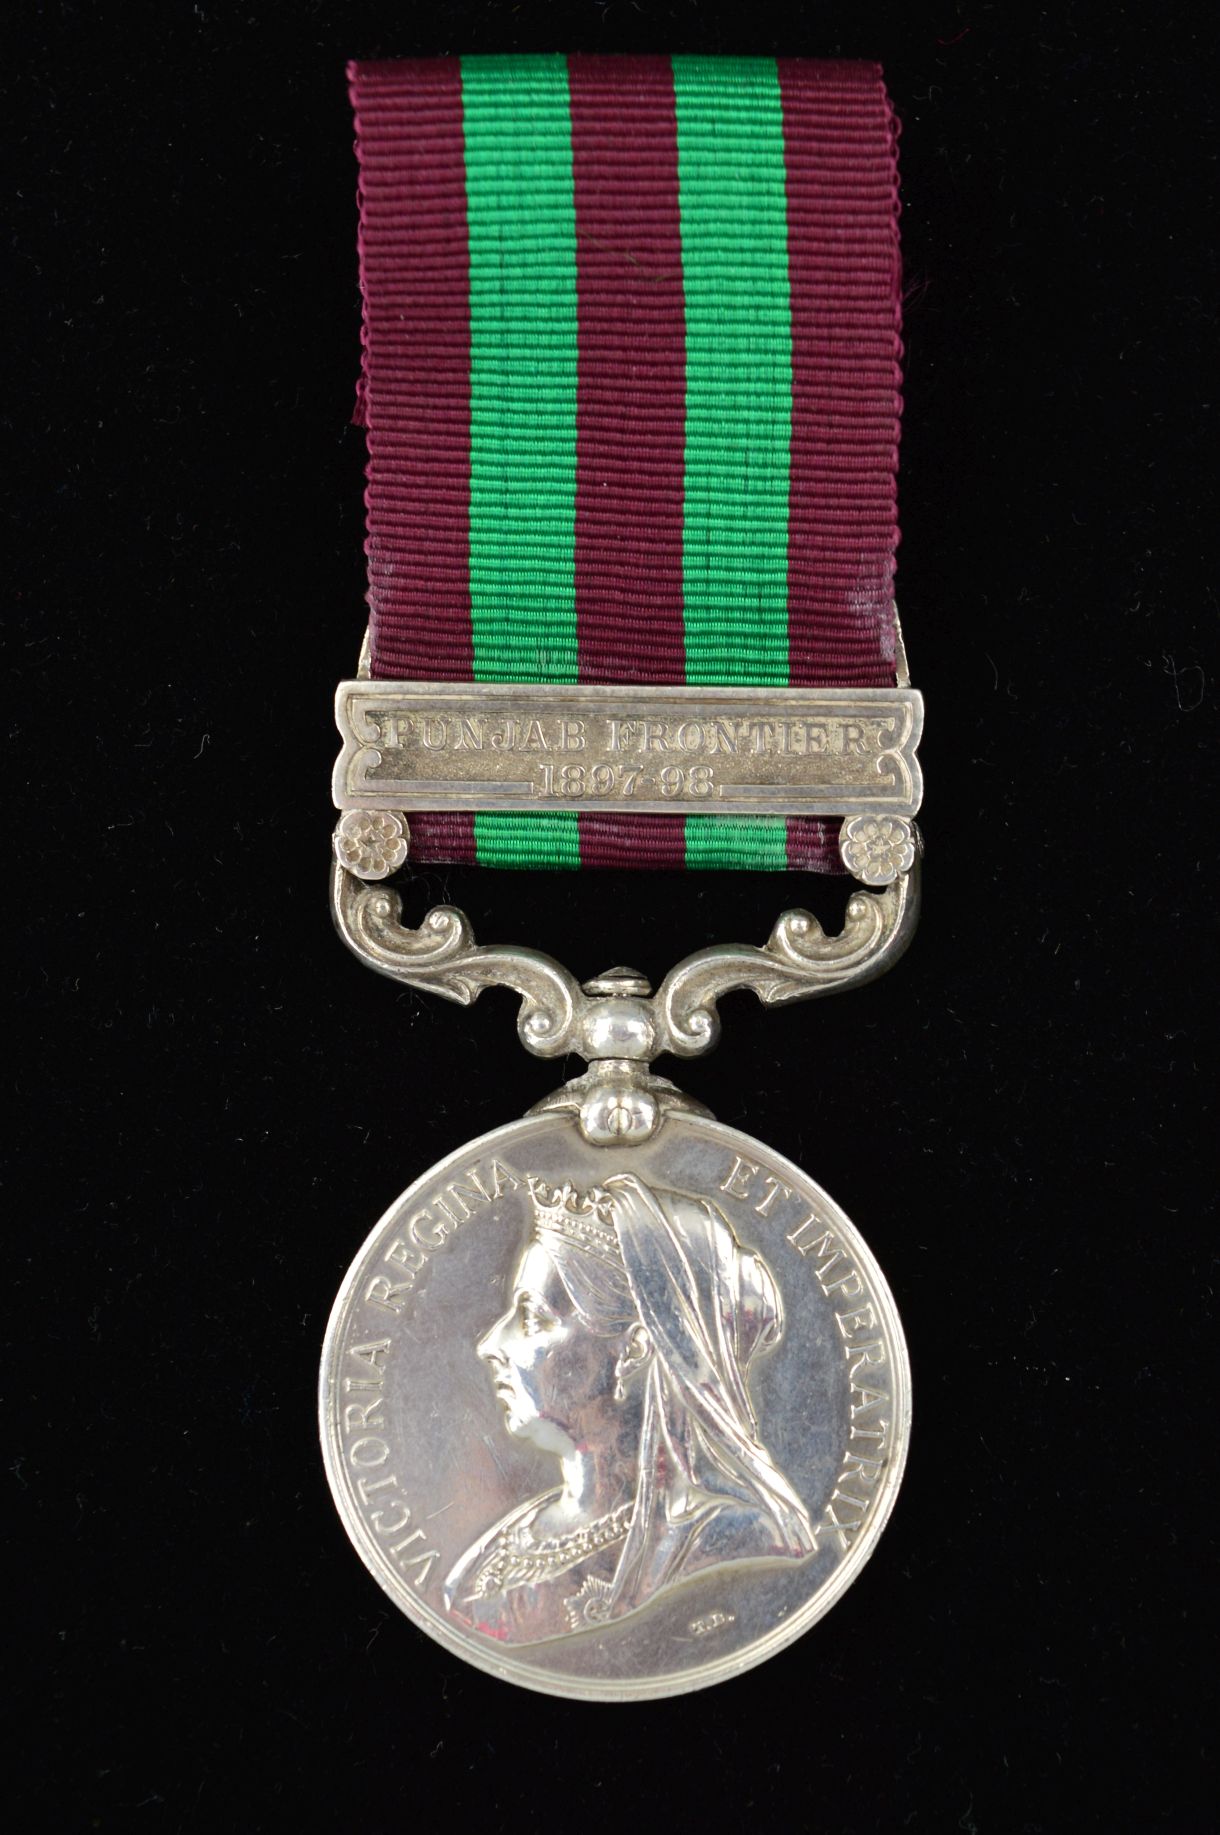 AN 1896 INDIA MEDAL, bar Punjab Frontier 1897-8, in scrolled naming to 3383 Pte J. Bowen/r 1st Btn